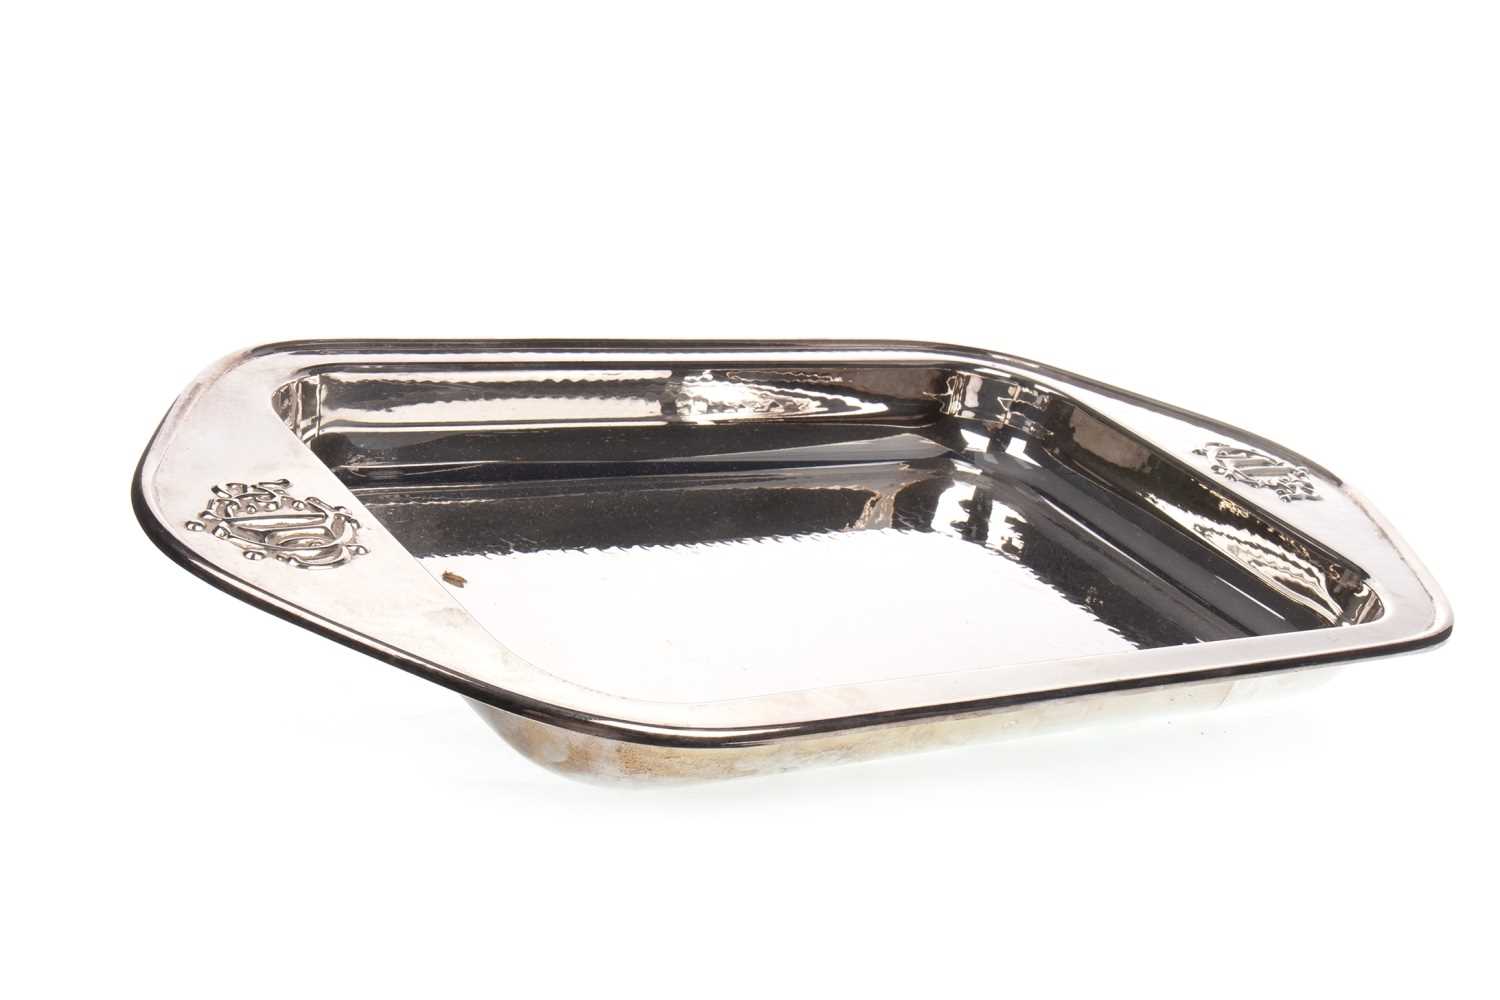 Lot 1767 - A SILVER PLATED RECTANGULAR TRAY BY CHRISTIAN DIOR